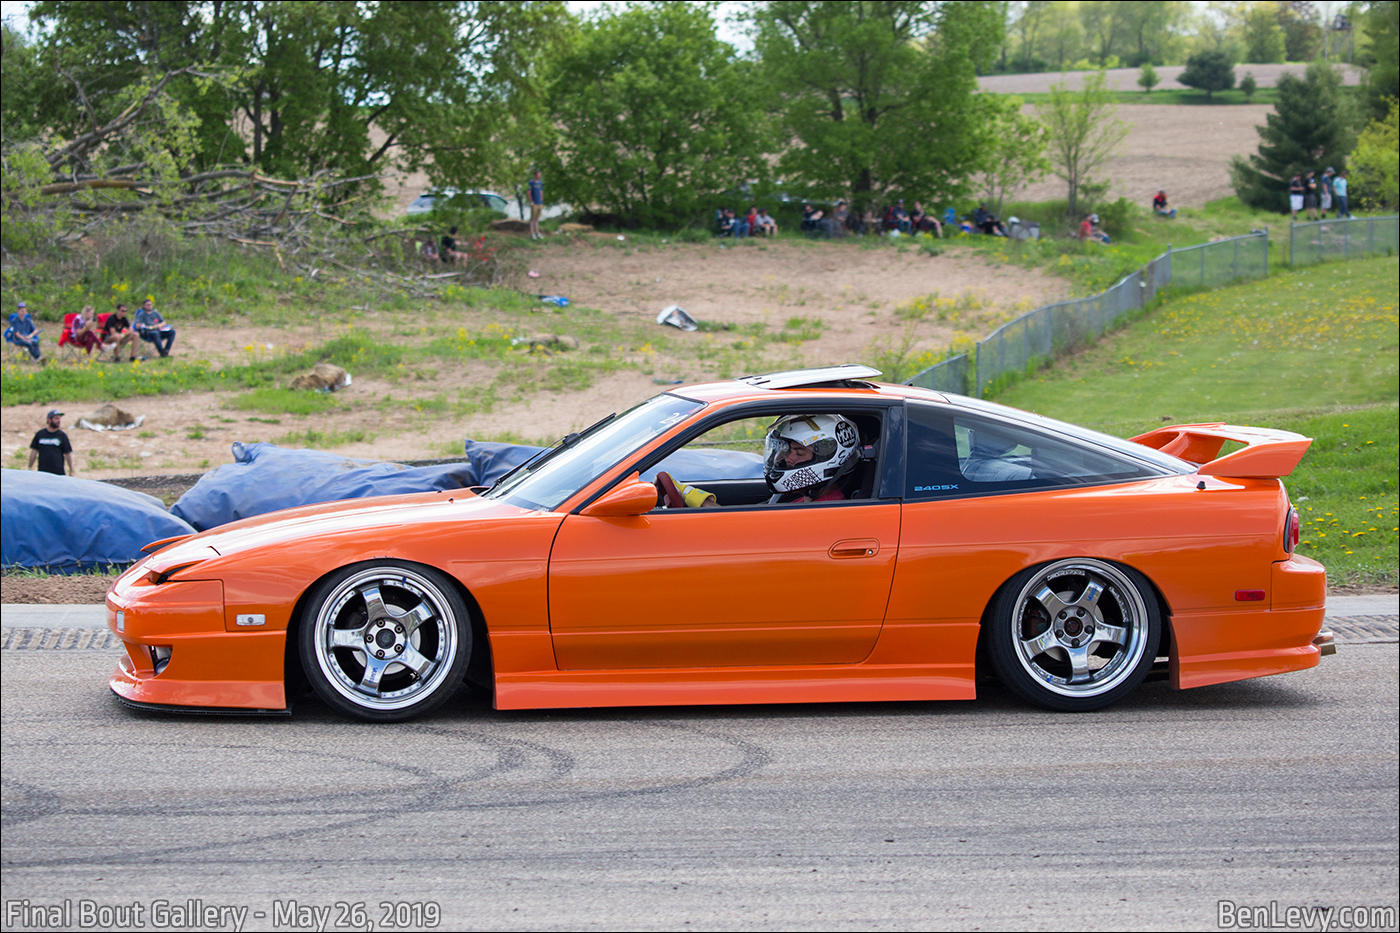 Orange Nissan 240SX on the Track at Final Bout Gallery